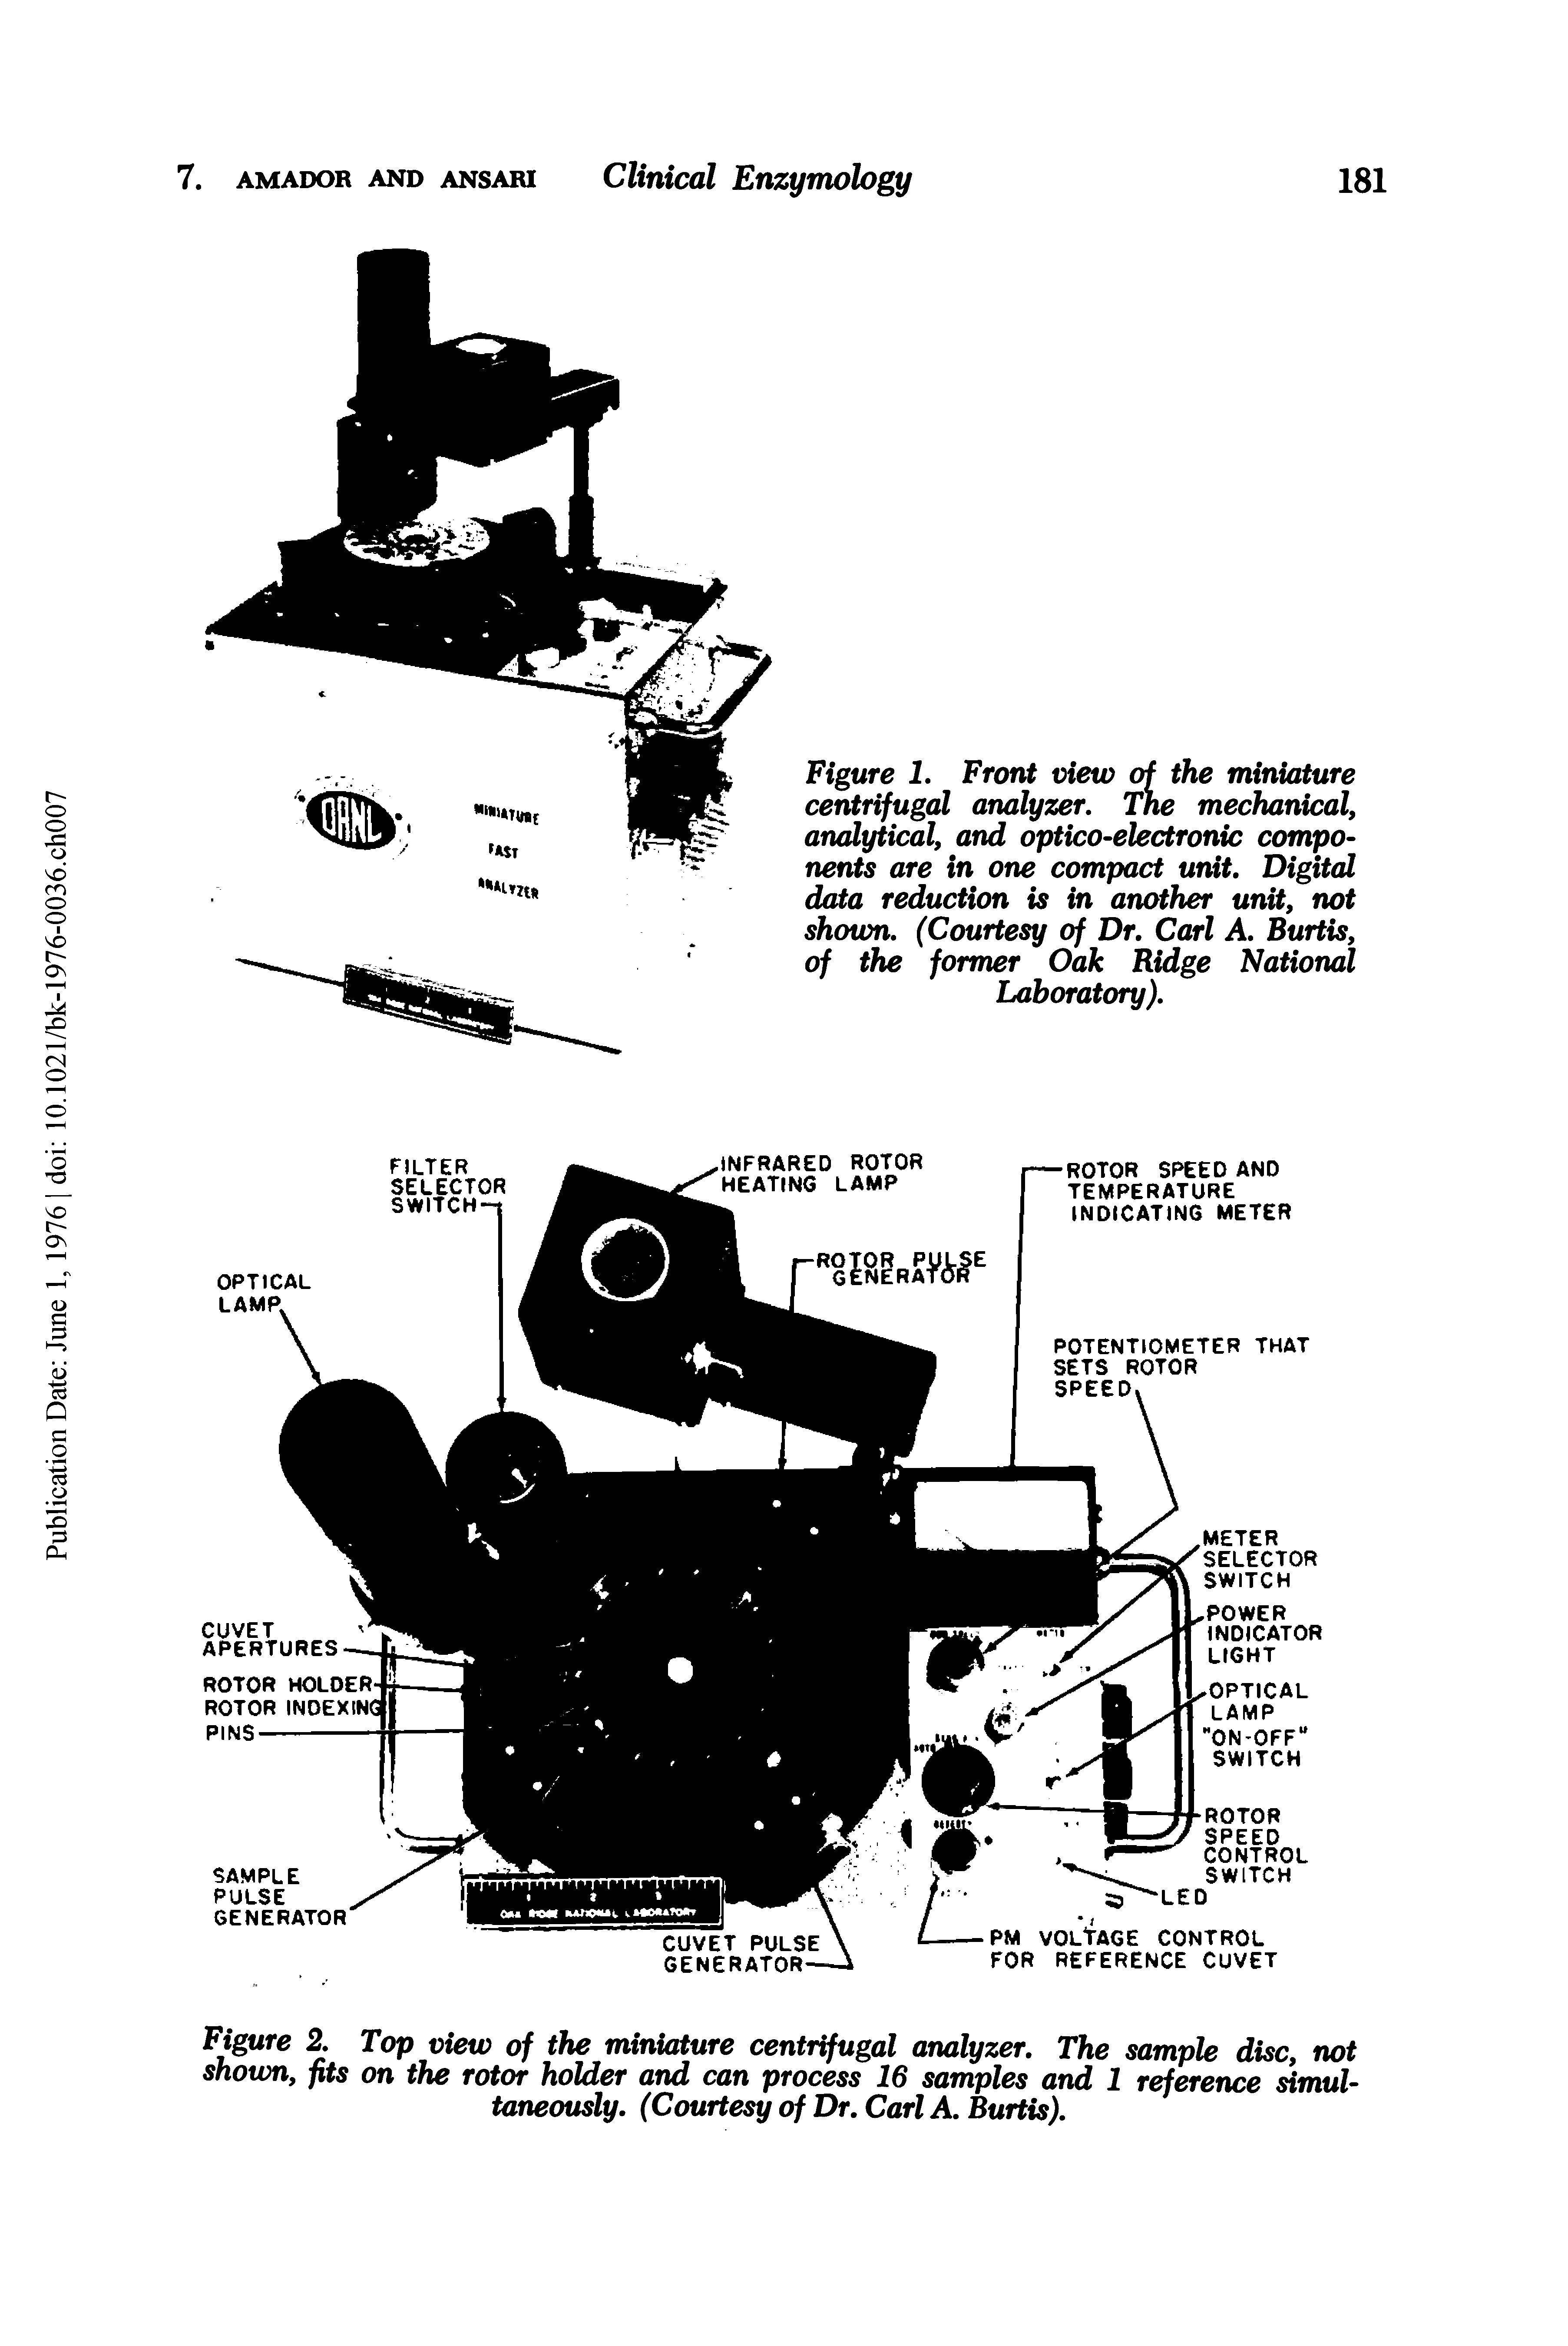 Figure I. Front view of the miniature centrifugal analyzer. The mechanical, analytical, and optico-electronic components are in one compact unit. Digital data reduction is in another unit, not shown, Courtesy of Dr, Carl A, Burtis, of the former Oak Ridge National Laboratory),...